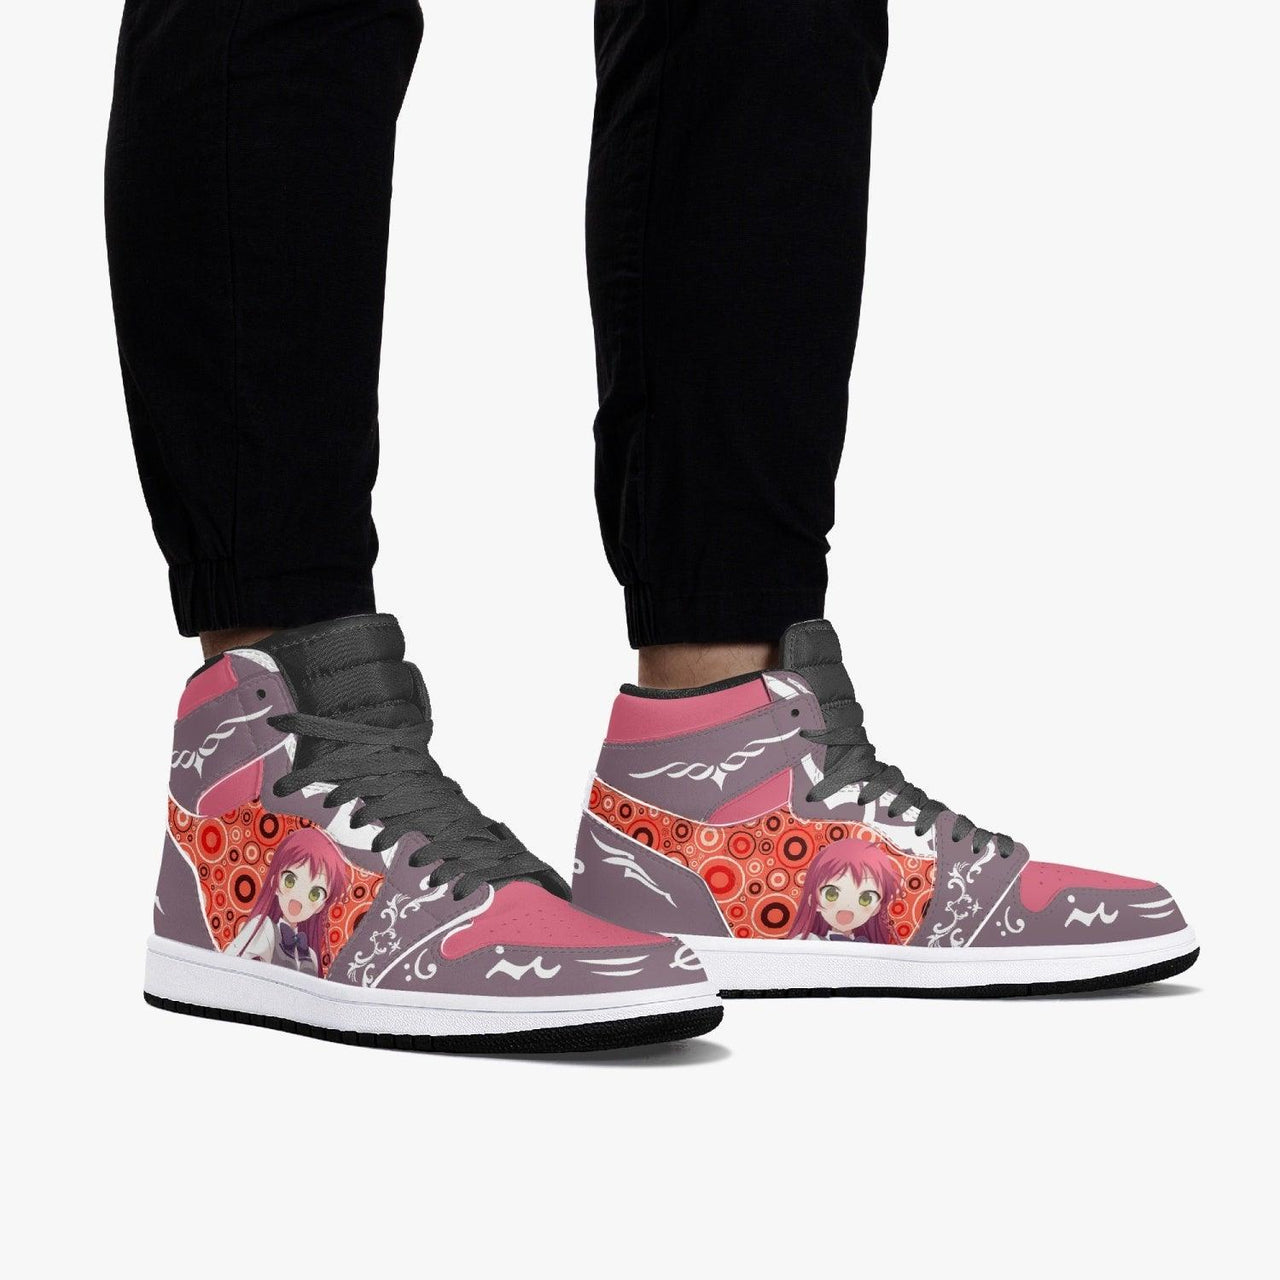 The Devil Is a Part-Timer! Emi Yusa JD1 Anime Shoes _ The Devil Is a Part-Timer! _ Ayuko